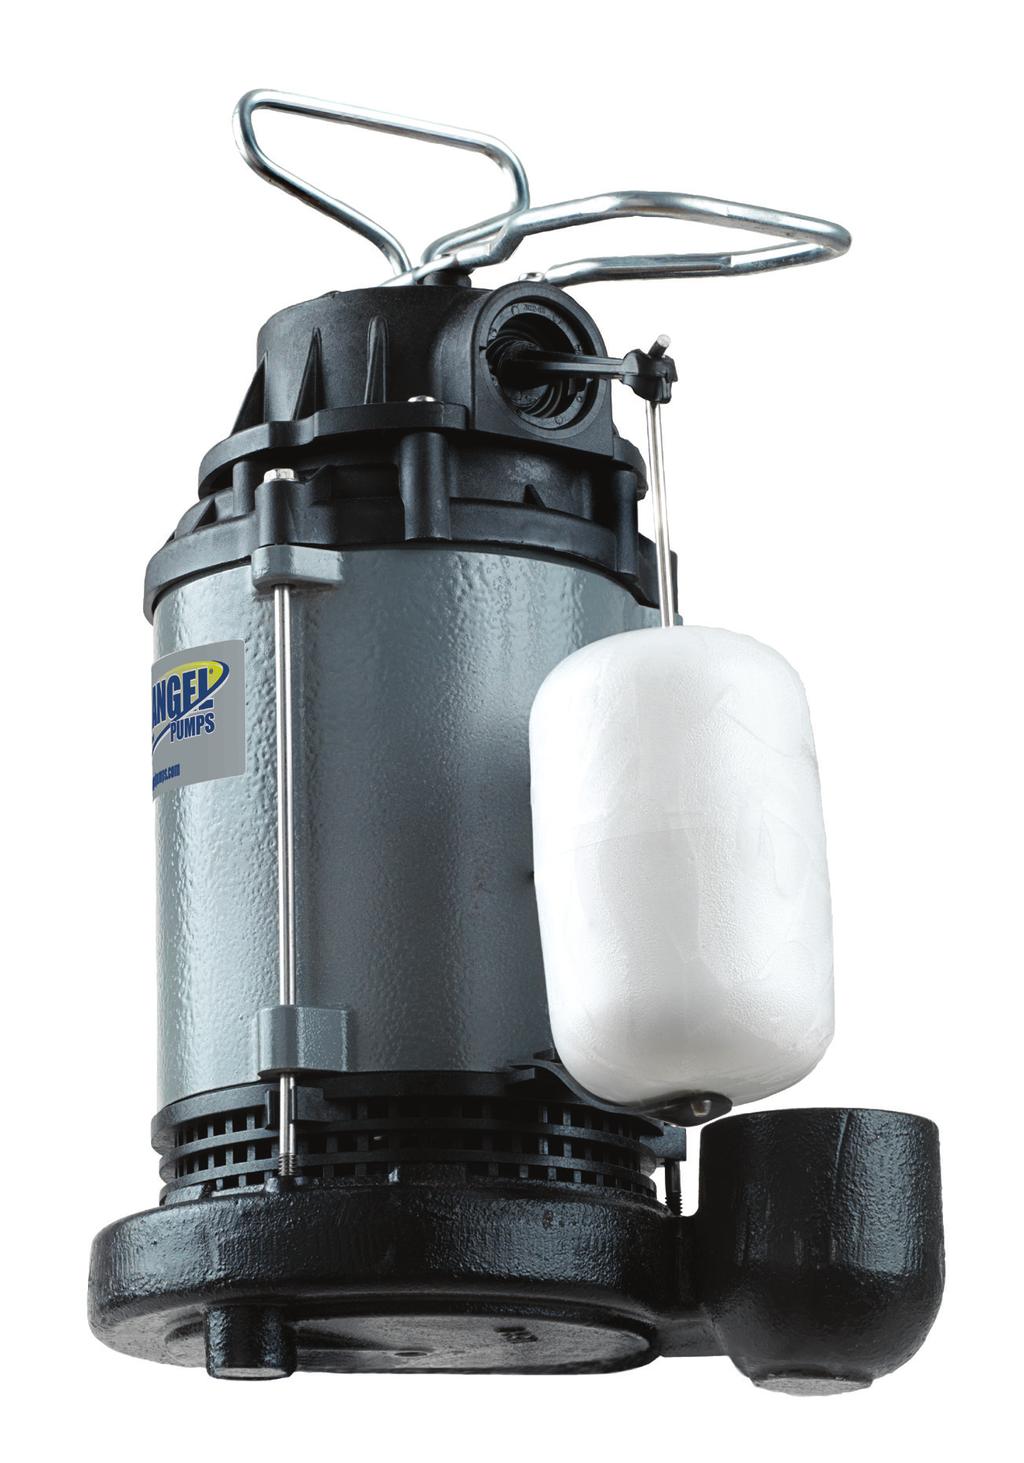 SUMP SUBMERSIBLE CAST IRON SUMP PUMP MODEL F7CIS, 3/4 HP SUMP MODEL FCIS, 1 HP CorrosionResistant Construction with Top Suction Design to Minimize Clogging F7CIS ¾ HP Max Flow 9 GPM: 87 GPM @ ' FCIS